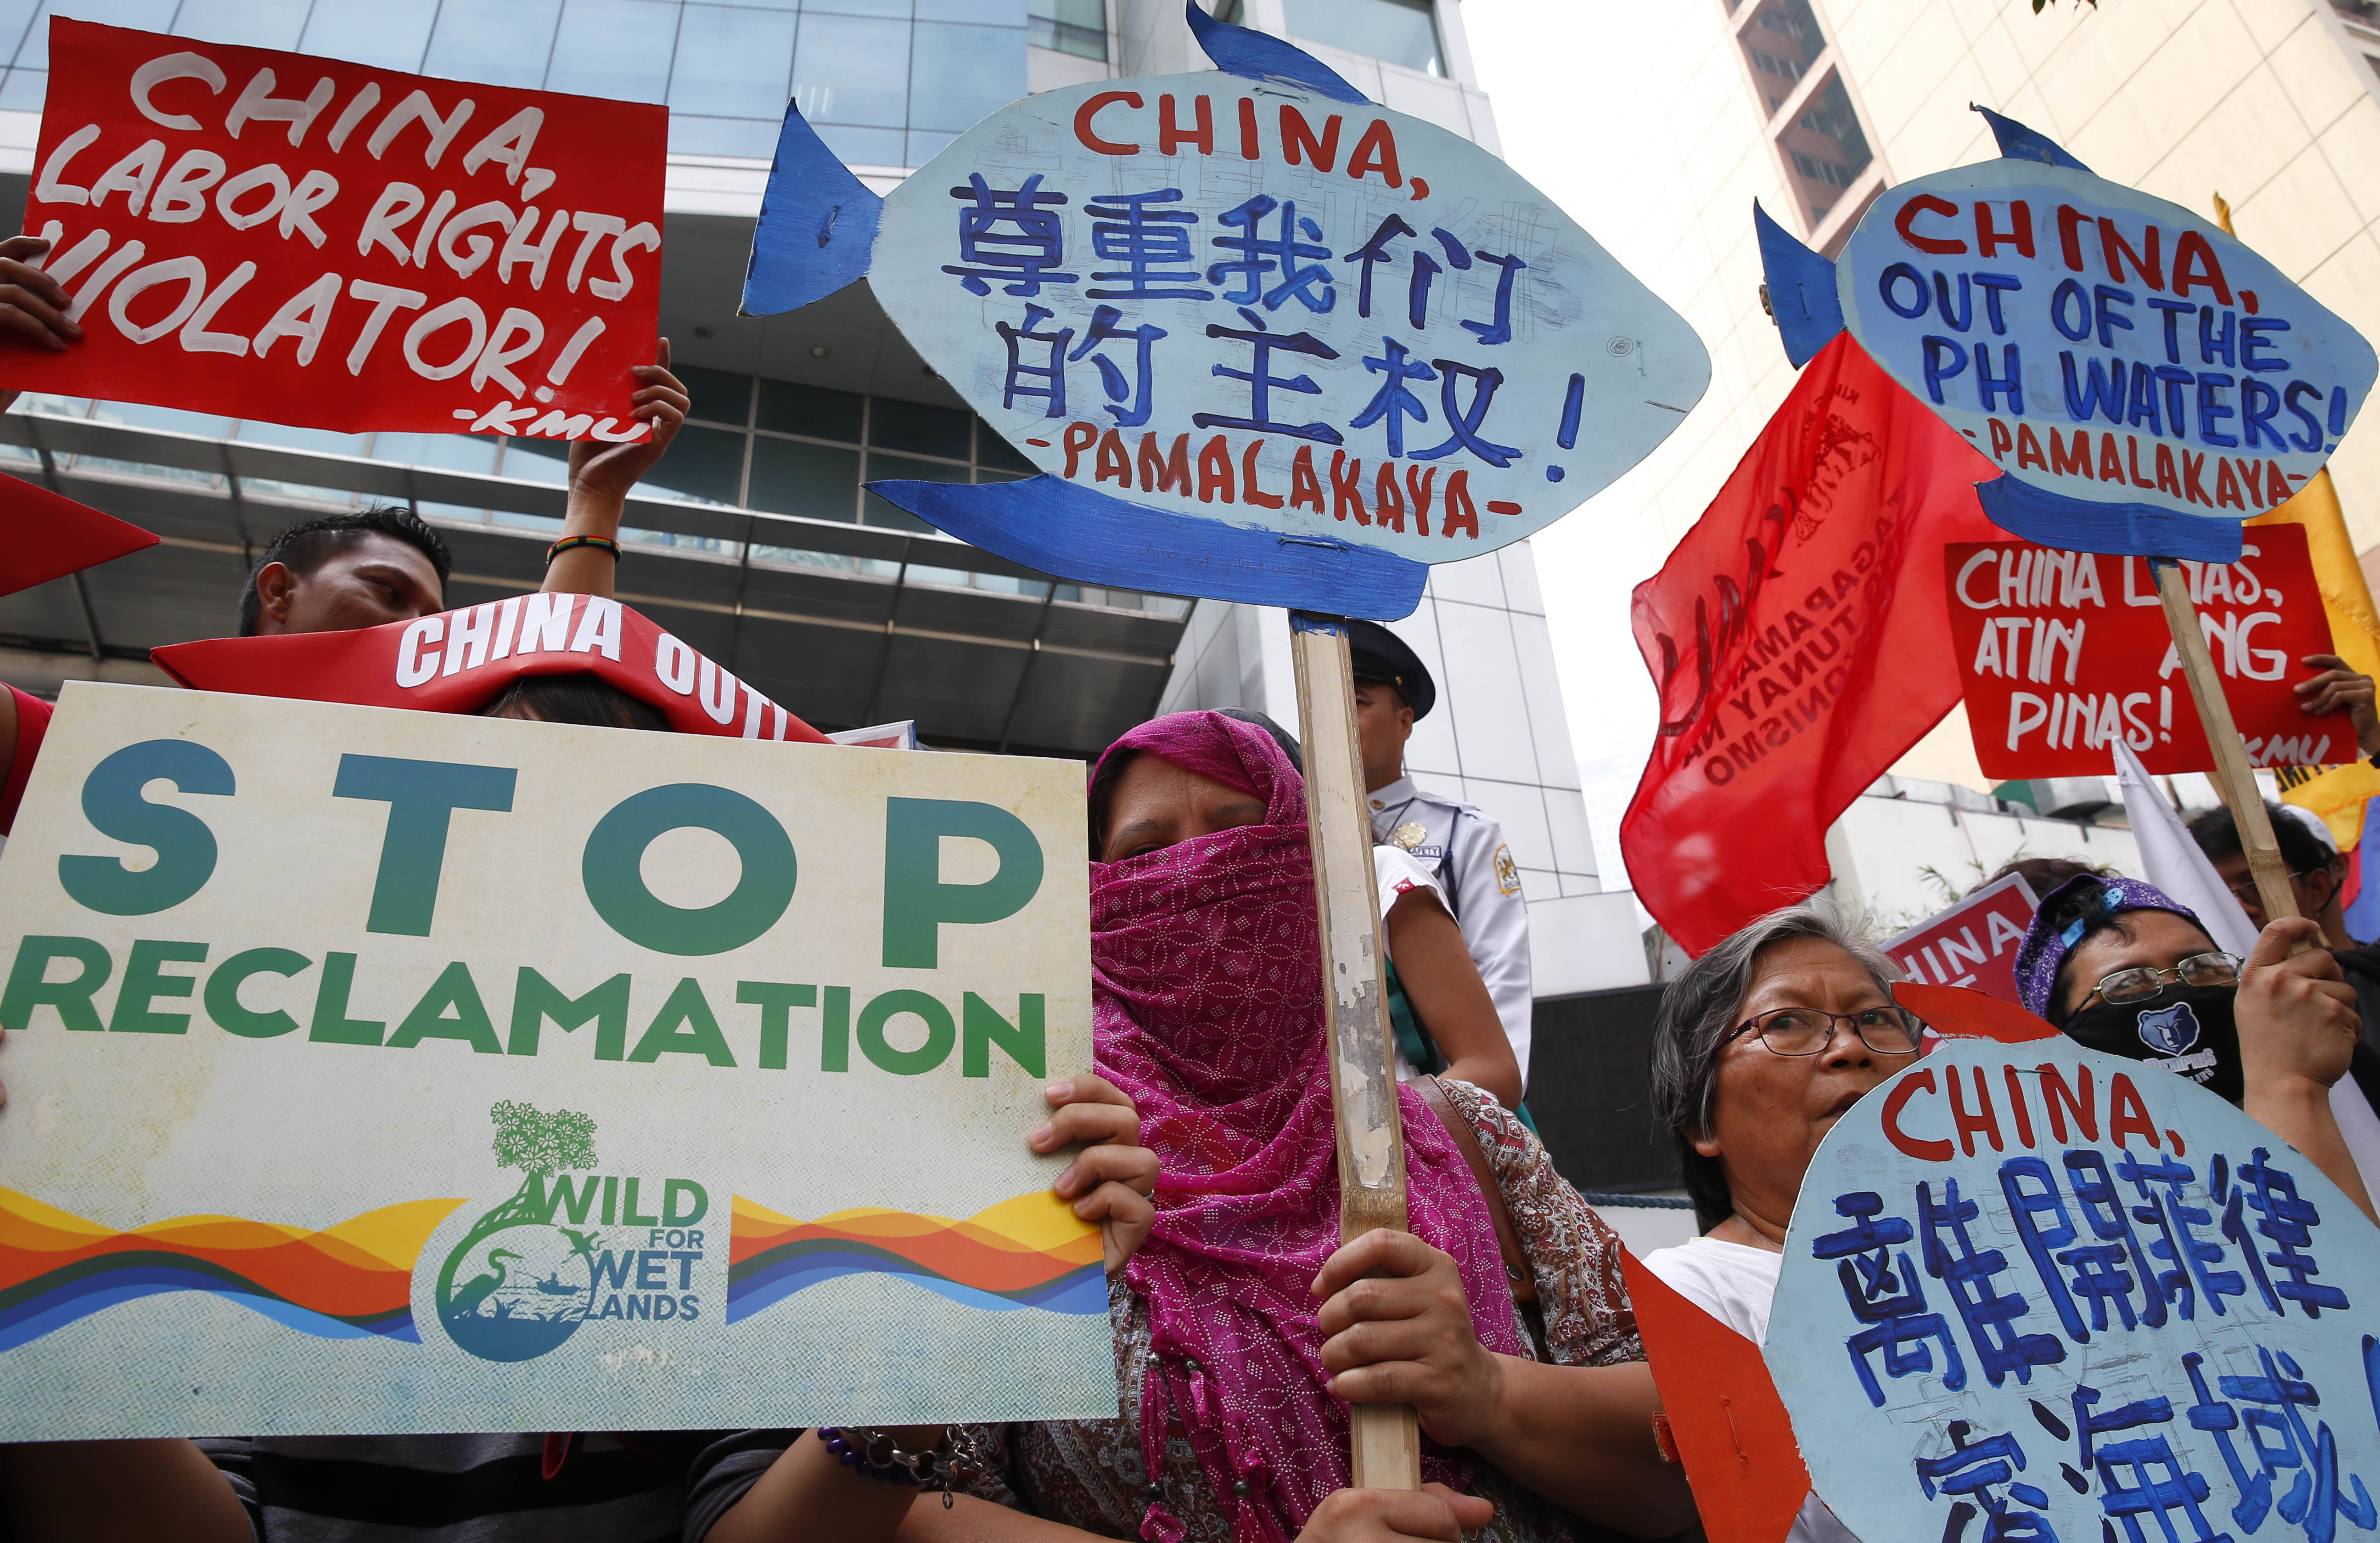 Protesters display placards during a rally at the Chinese Consulate to protest China's alleged continued militarization of the disputed islands in the South China Sea known as Spratlys Saturday, Feb. 10, 2018 in the financial district of Makati city east of Manila, Philippines. The protesters also denounced President Rodrigo Duterte's inaction over China's continued build up of military facilities and structures at the disputed islands. (AP Photo/Bullit Marquez)